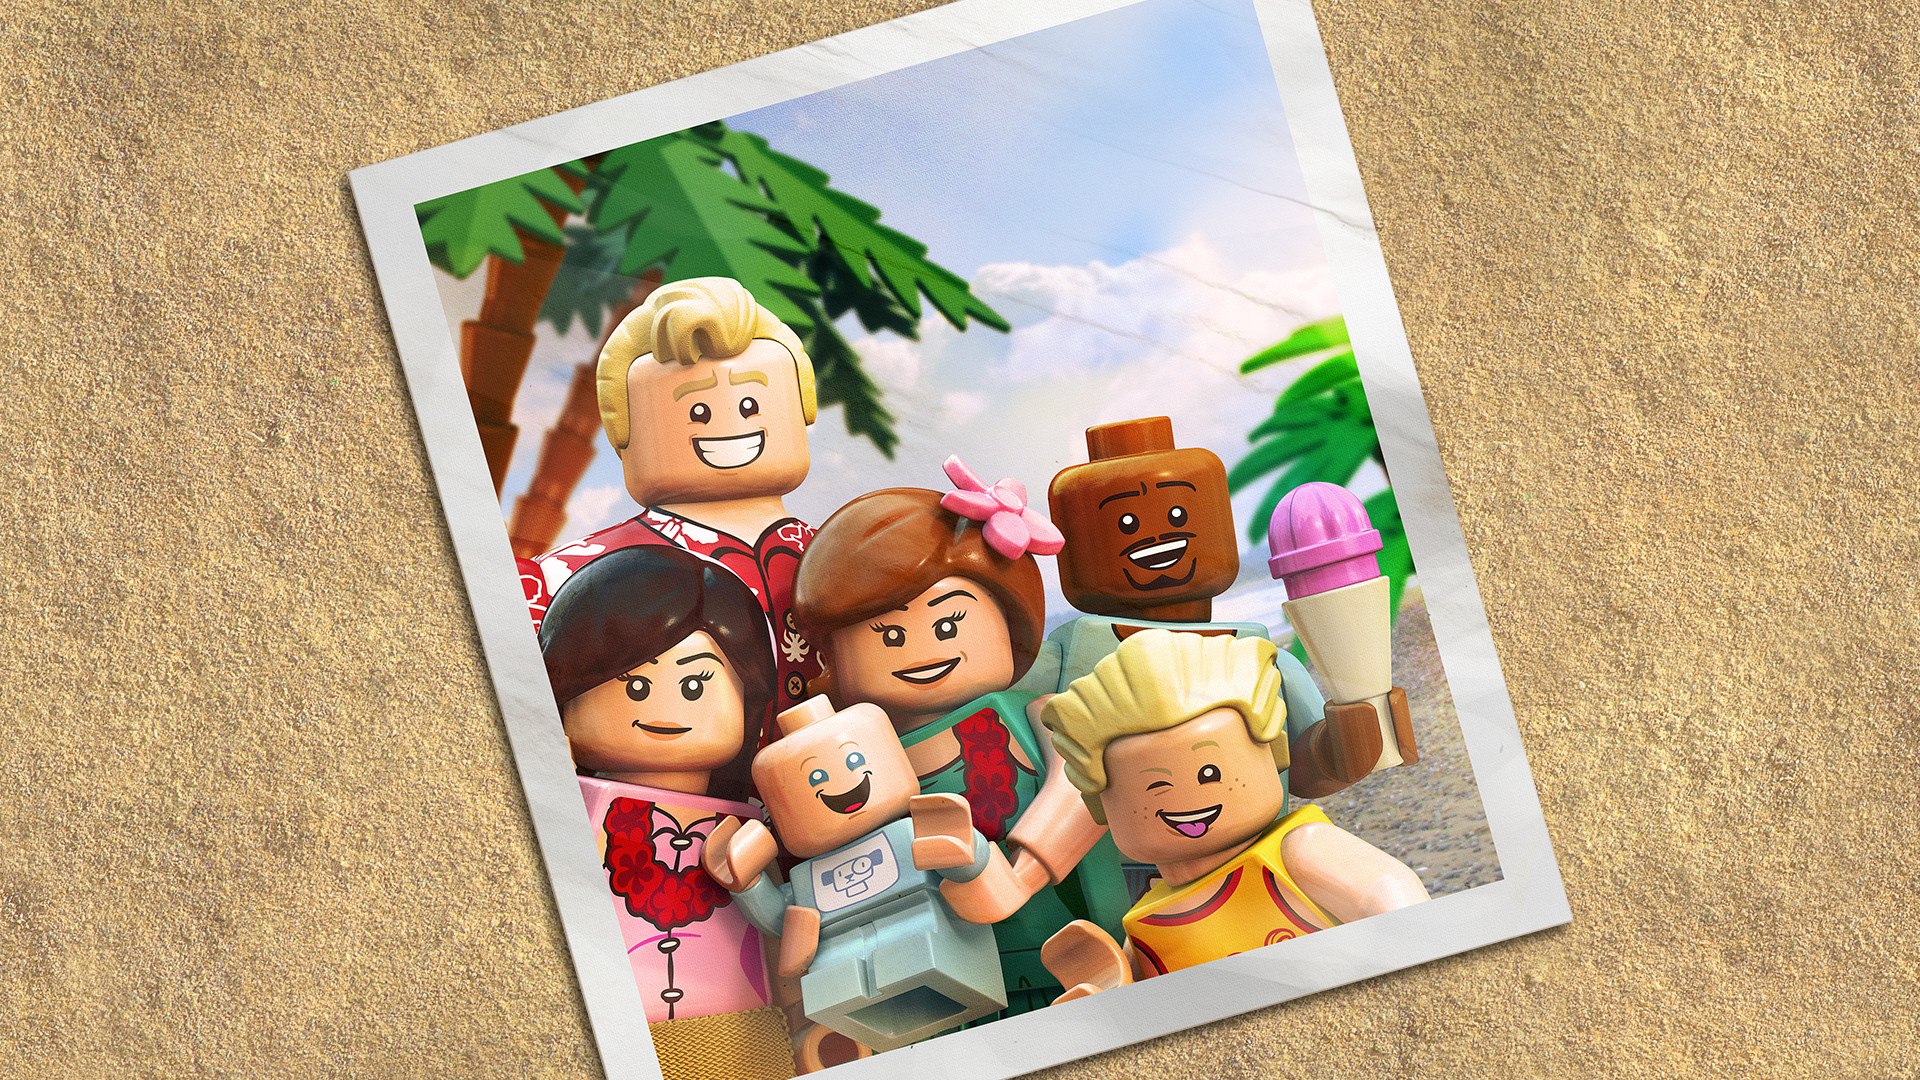 LEGO THE INCREDIBLES - Parr Family Vacation Character Pack DLC EU PS5 CD Key 0.73 $